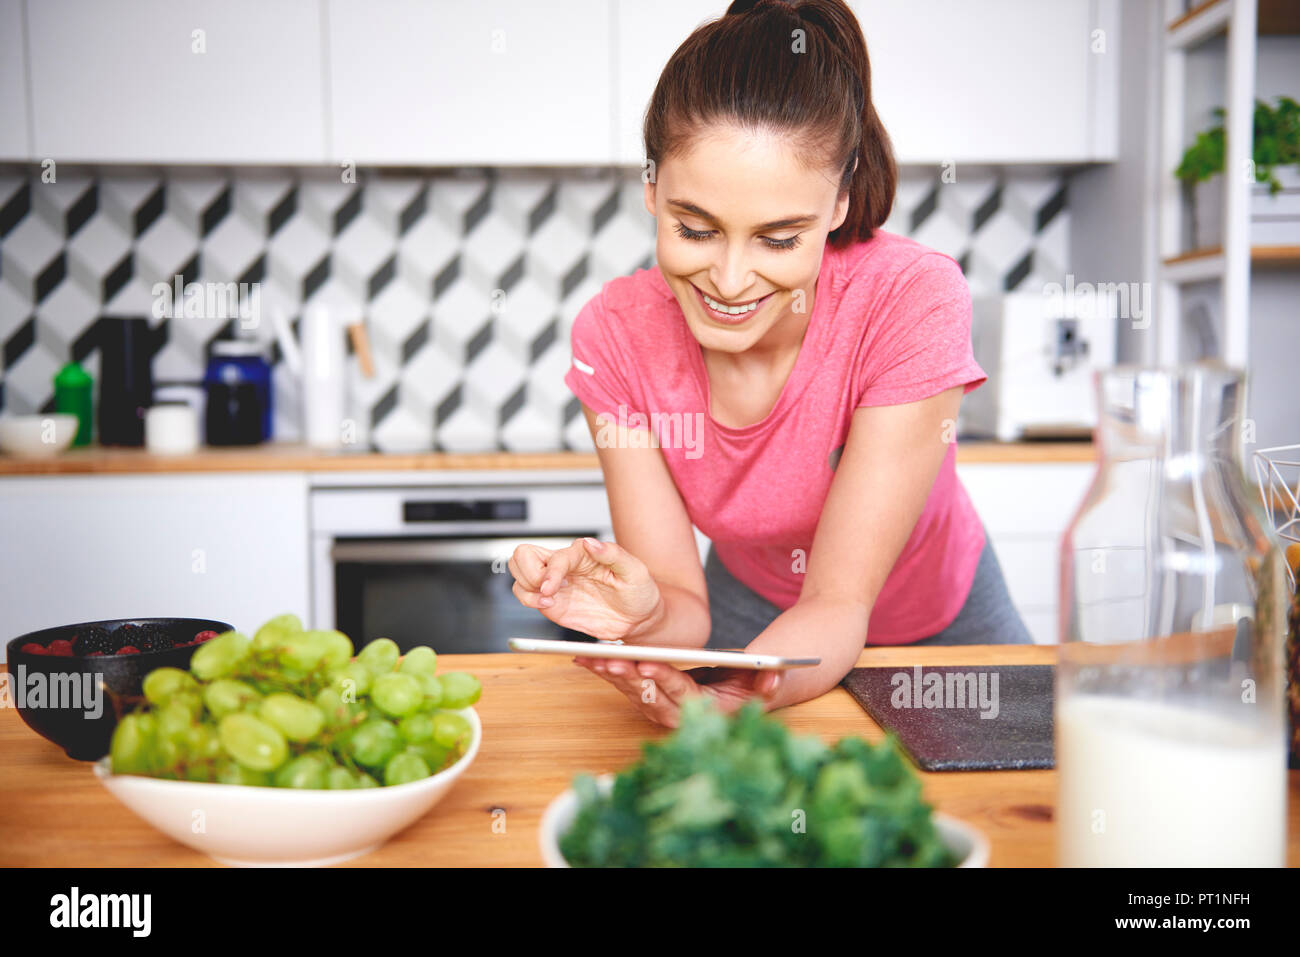 Smiling young woman using tablet in the kitchen Stock Photo